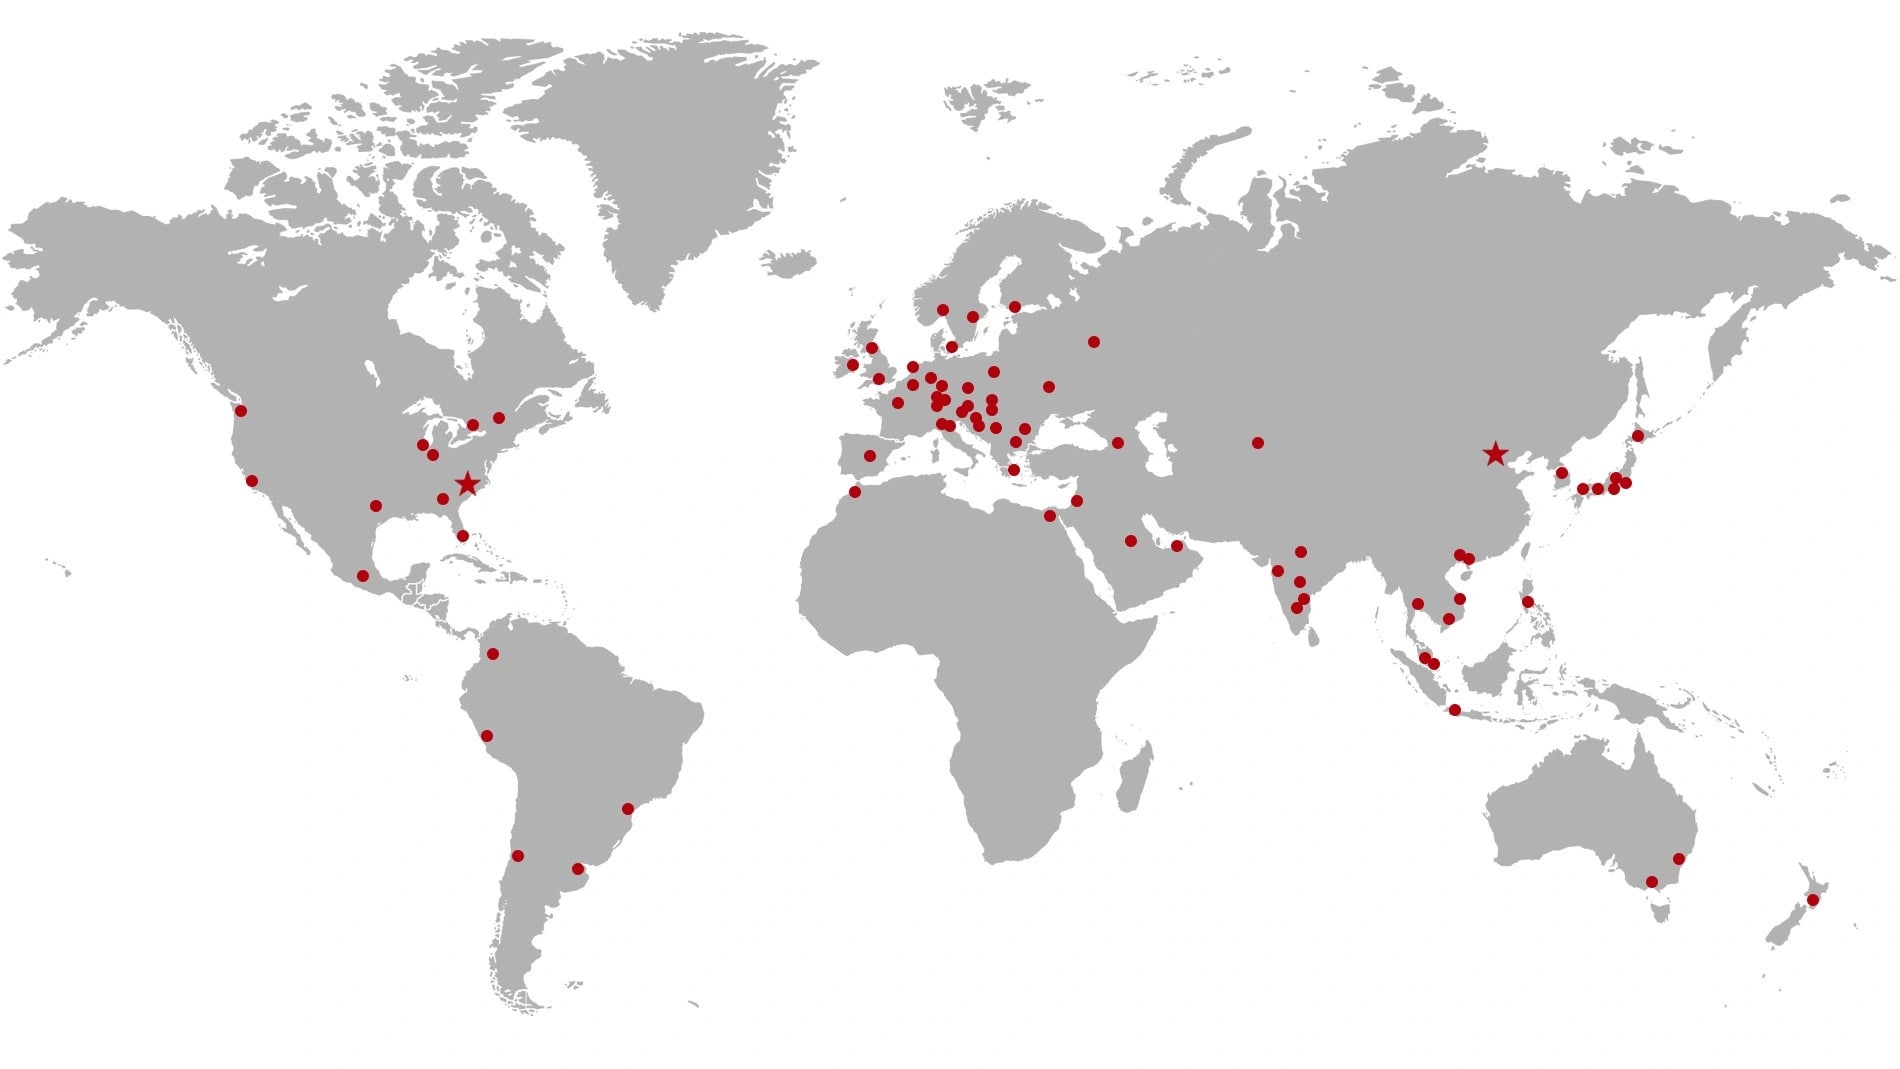 World map with dots showing the Lenovo locations